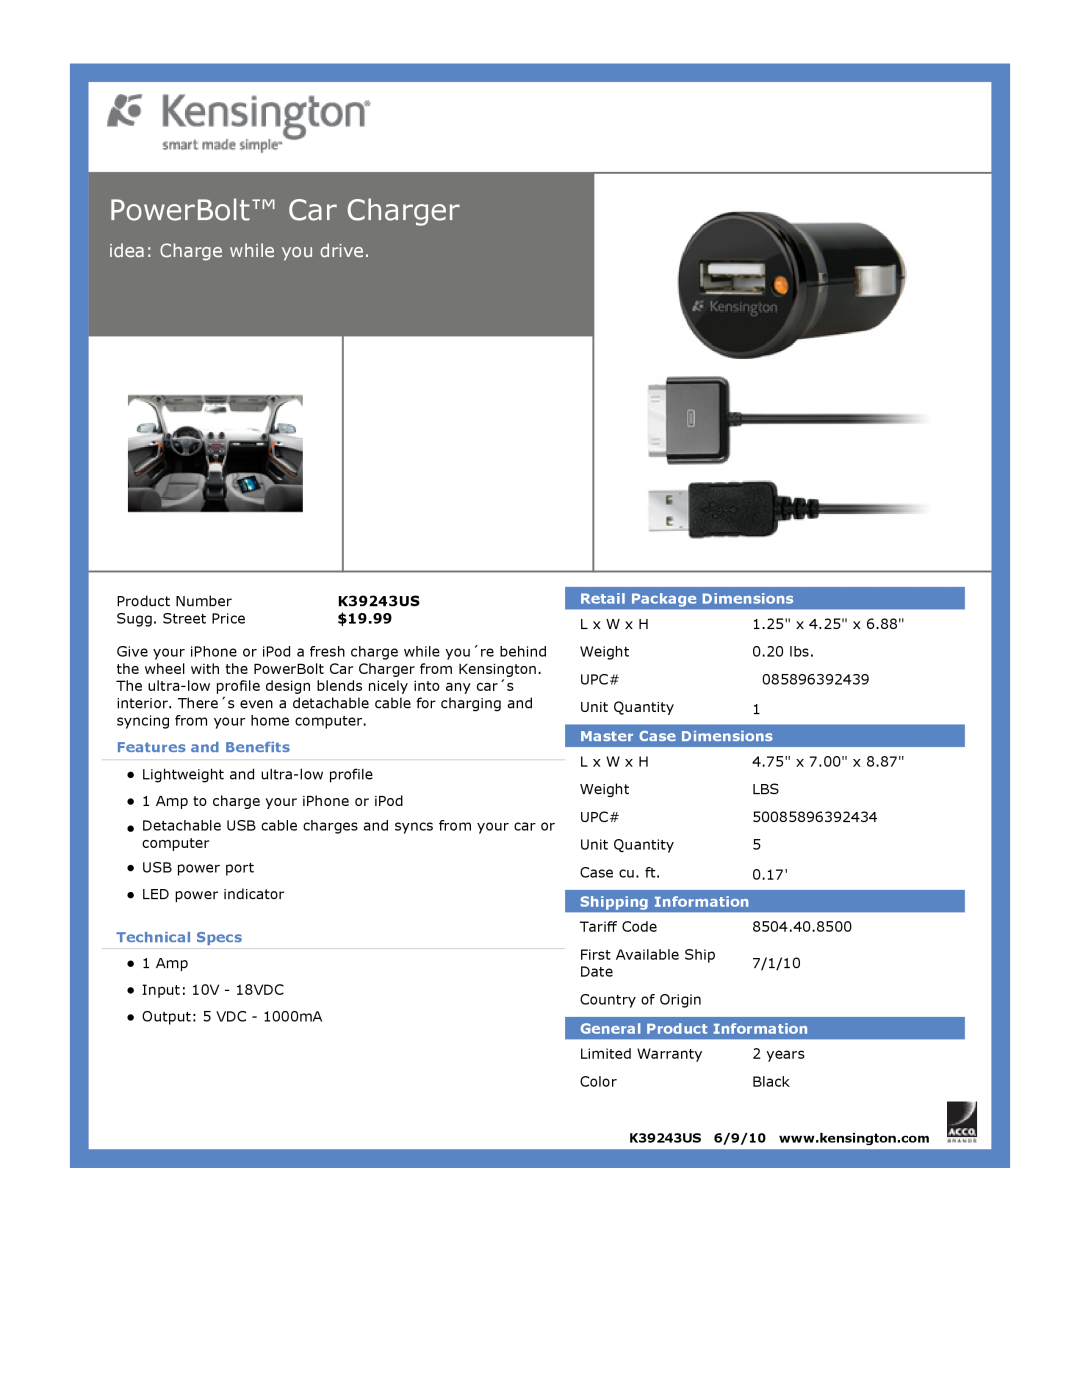 Kensington EU64325 PowerBolt Car Charger, idea: Charge while you drive, $19.99, Features and Benefits, Technical Specs 